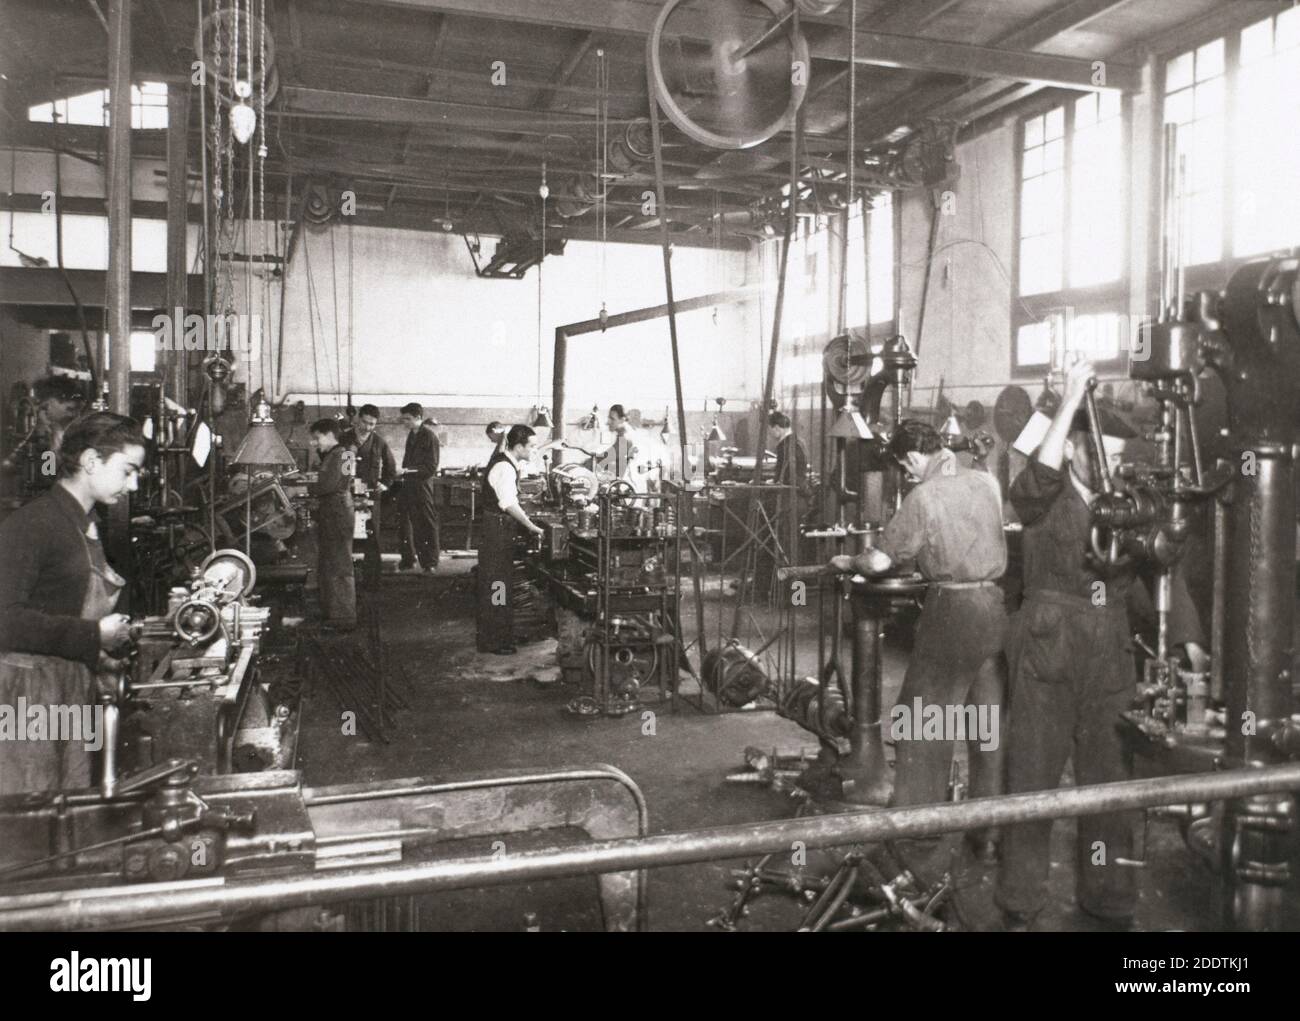 Spanish Industry, 1945. Production line of a company dedicated to the manufacture of motorcycle components. Mechanical workshop. Spain, Catalonia, Barcelona. Stock Photo